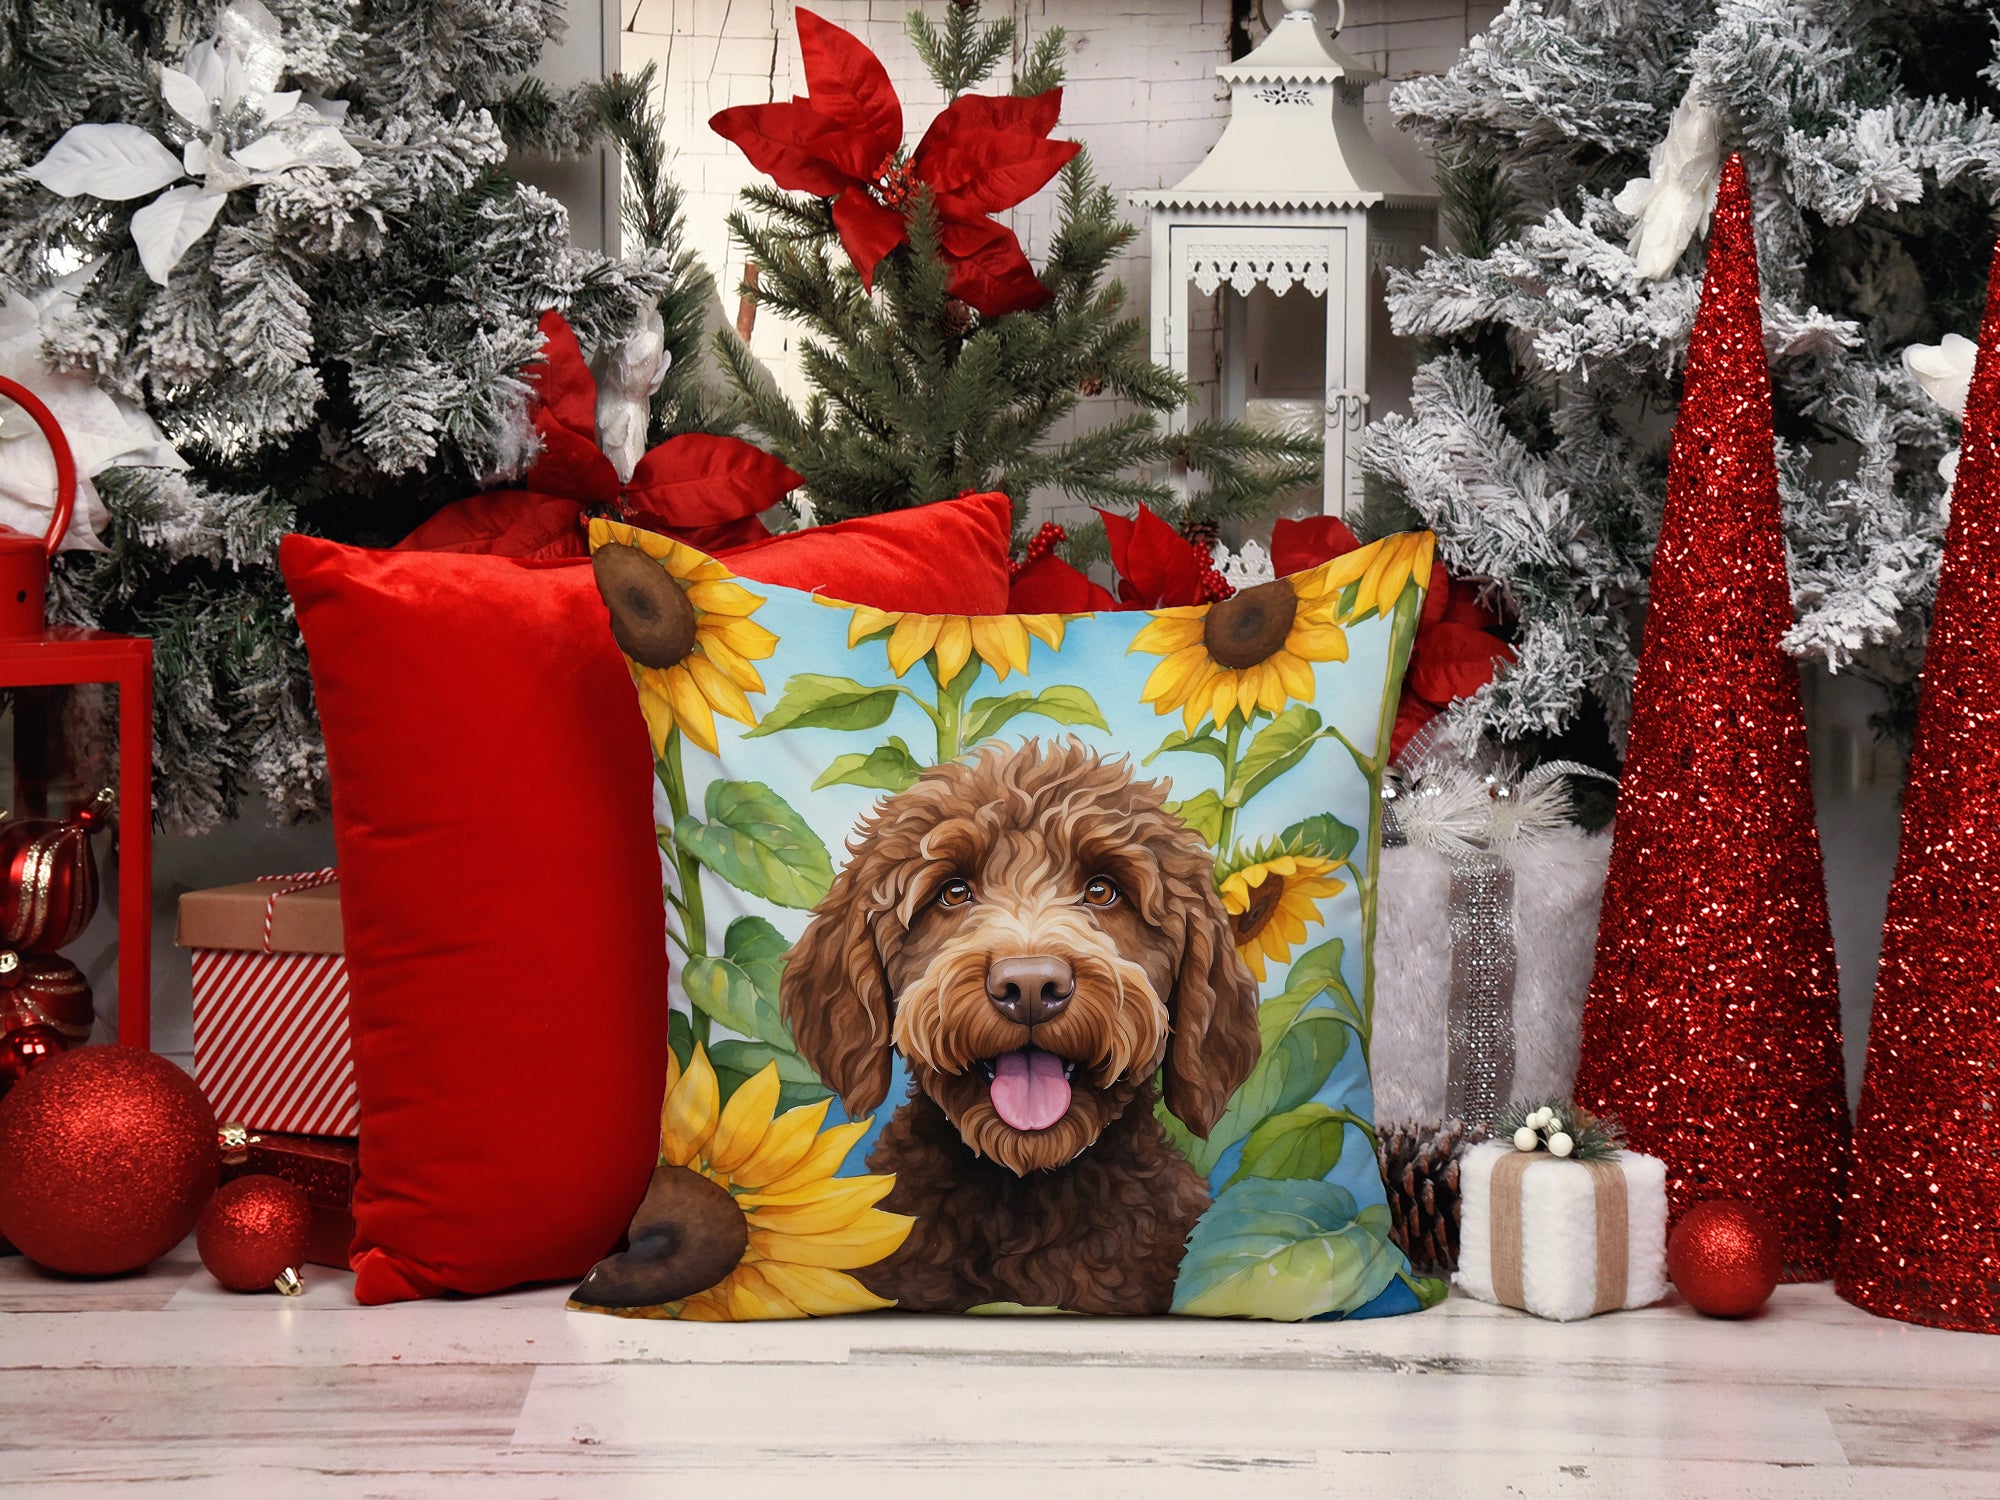 Labradoodle in Sunflowers Throw Pillow